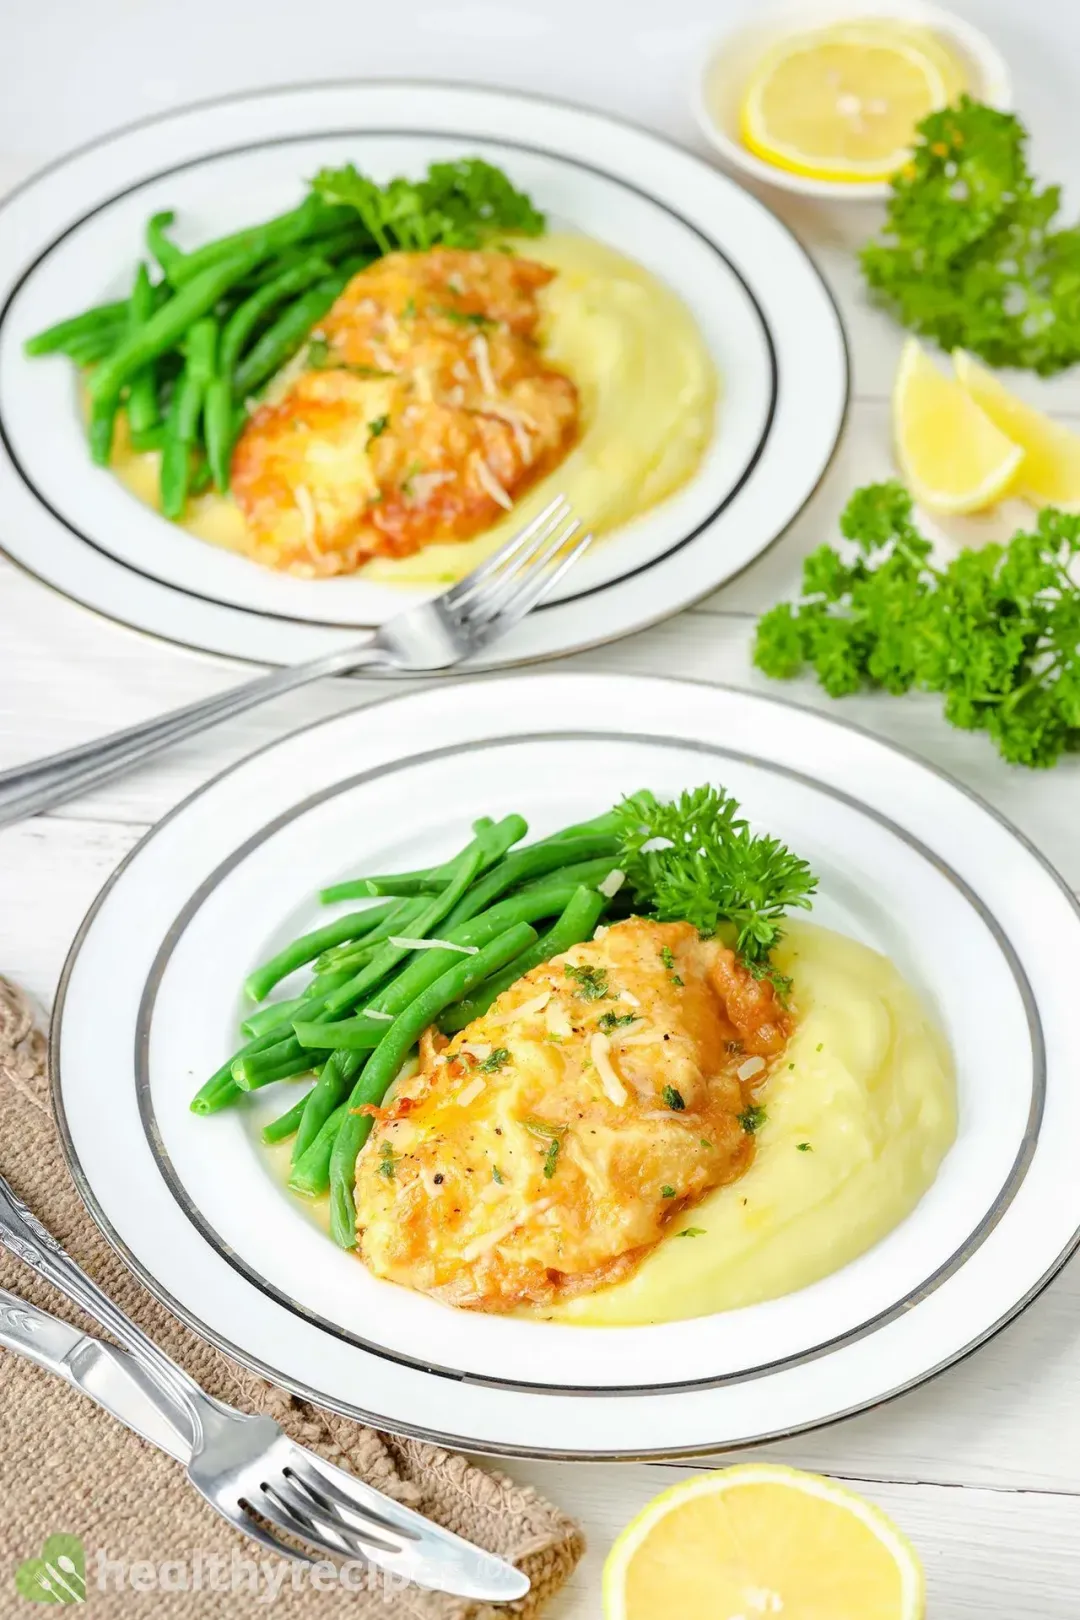 What to Serve With Chicken Francese